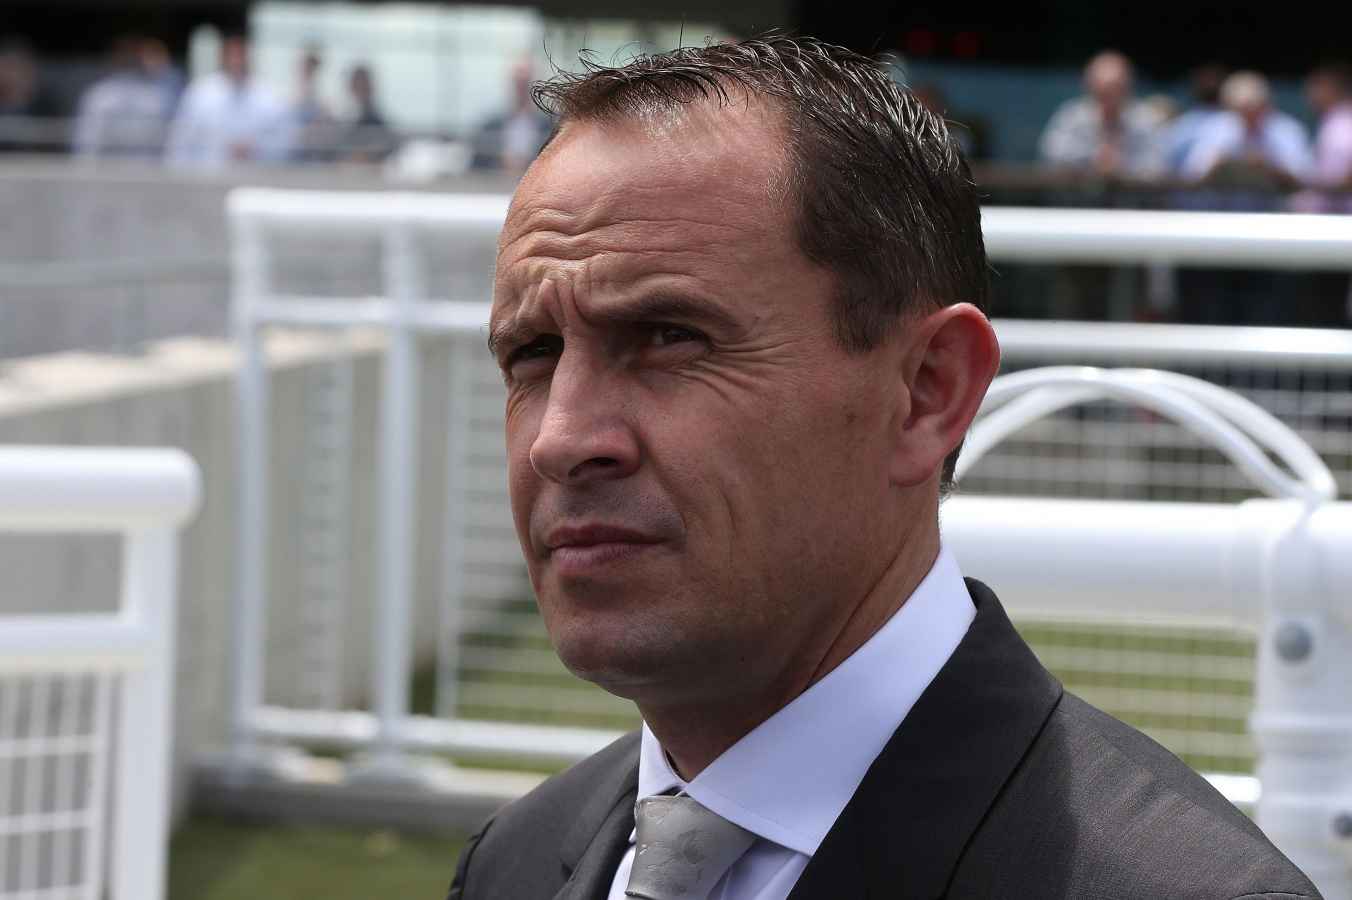 chris-waller-was-successful-in-his-appeal-on-friday-1486703403_1352x900